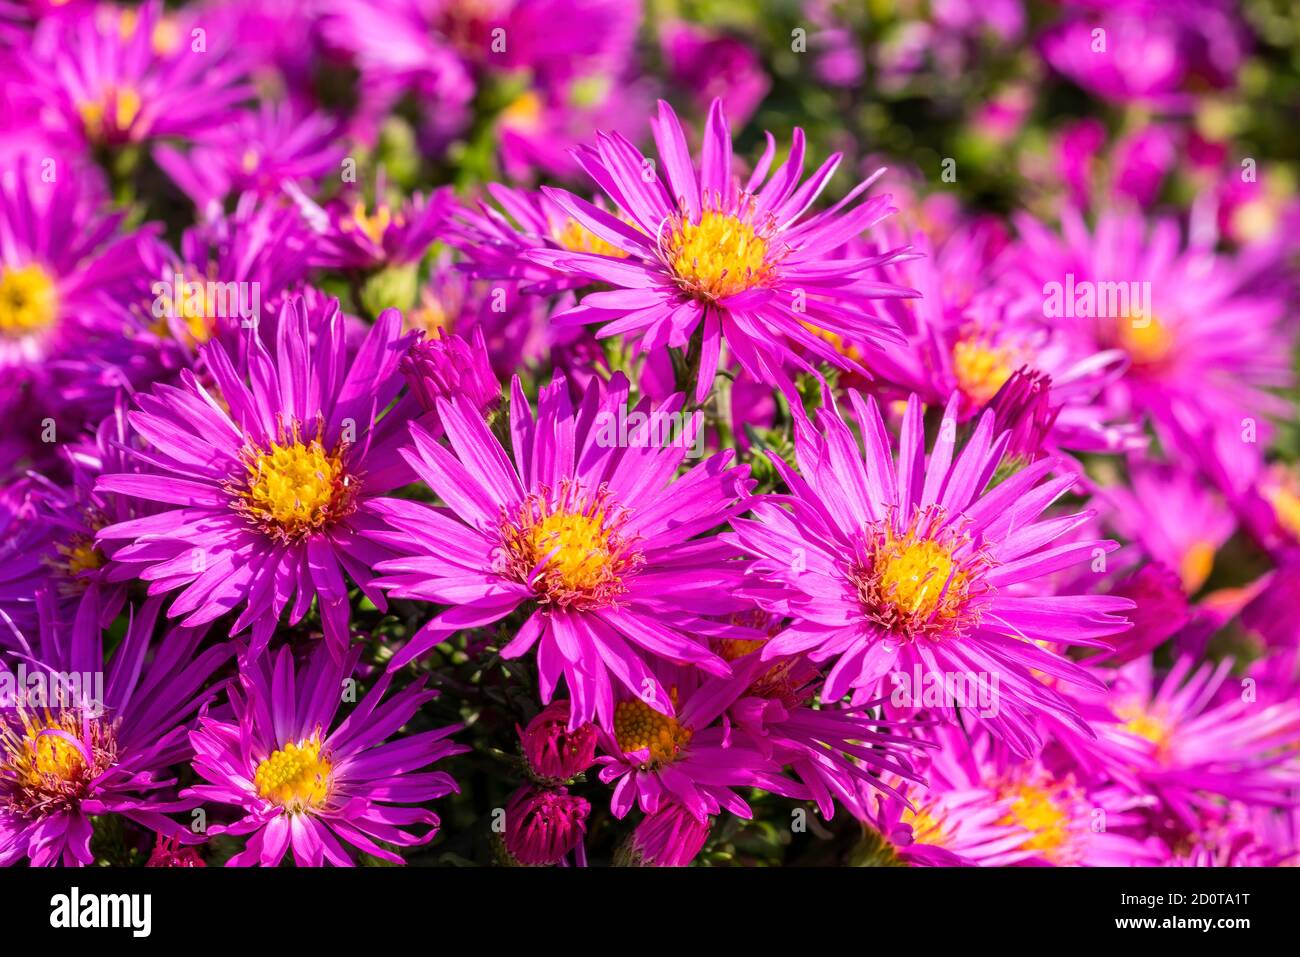 Aster novi belgii 'Dandy' a magenta pink herbaceous summer autumn perennial flower plant commonly known as Michaelmas daisy stock photo image Stock Photo